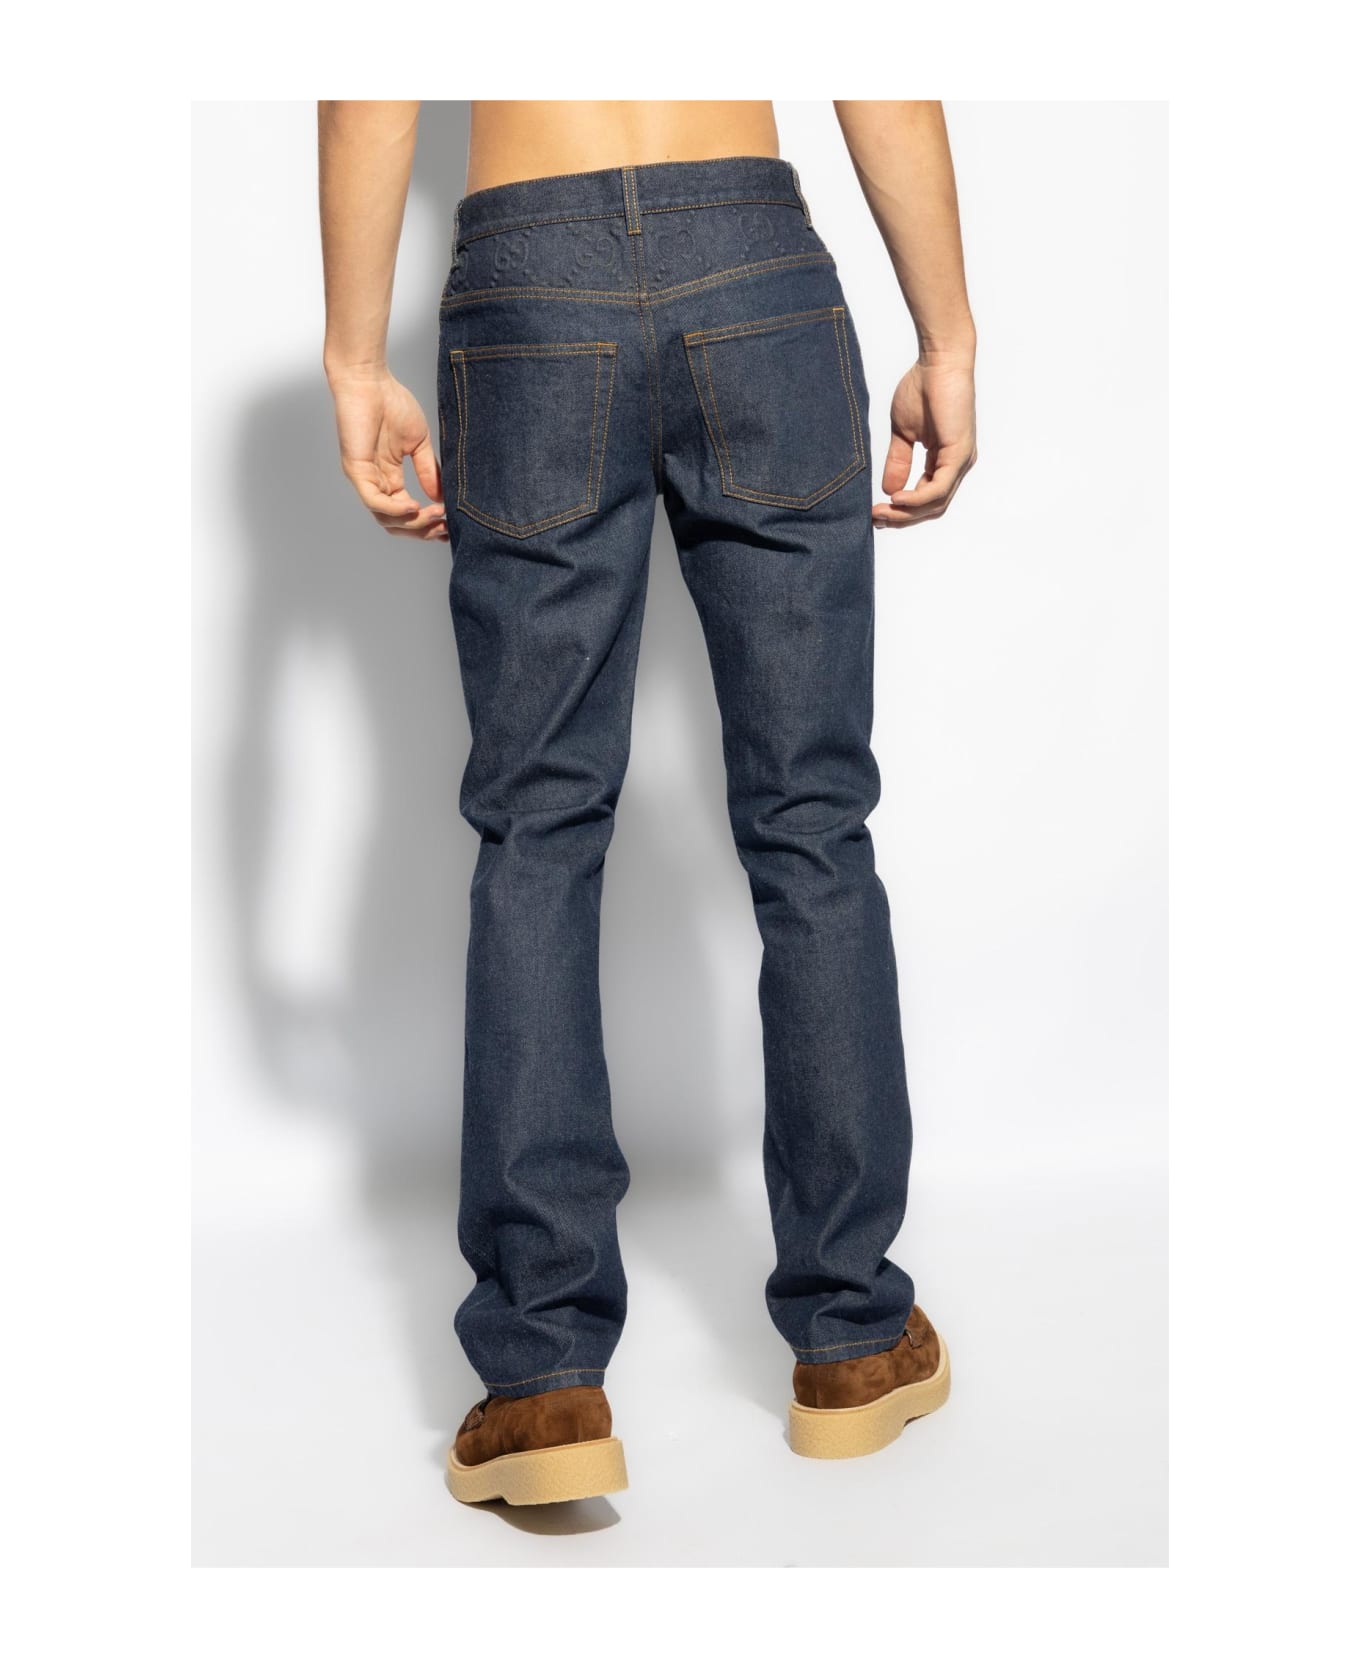 Gucci Jeans With Straight Legs - DARKBLUE デニム